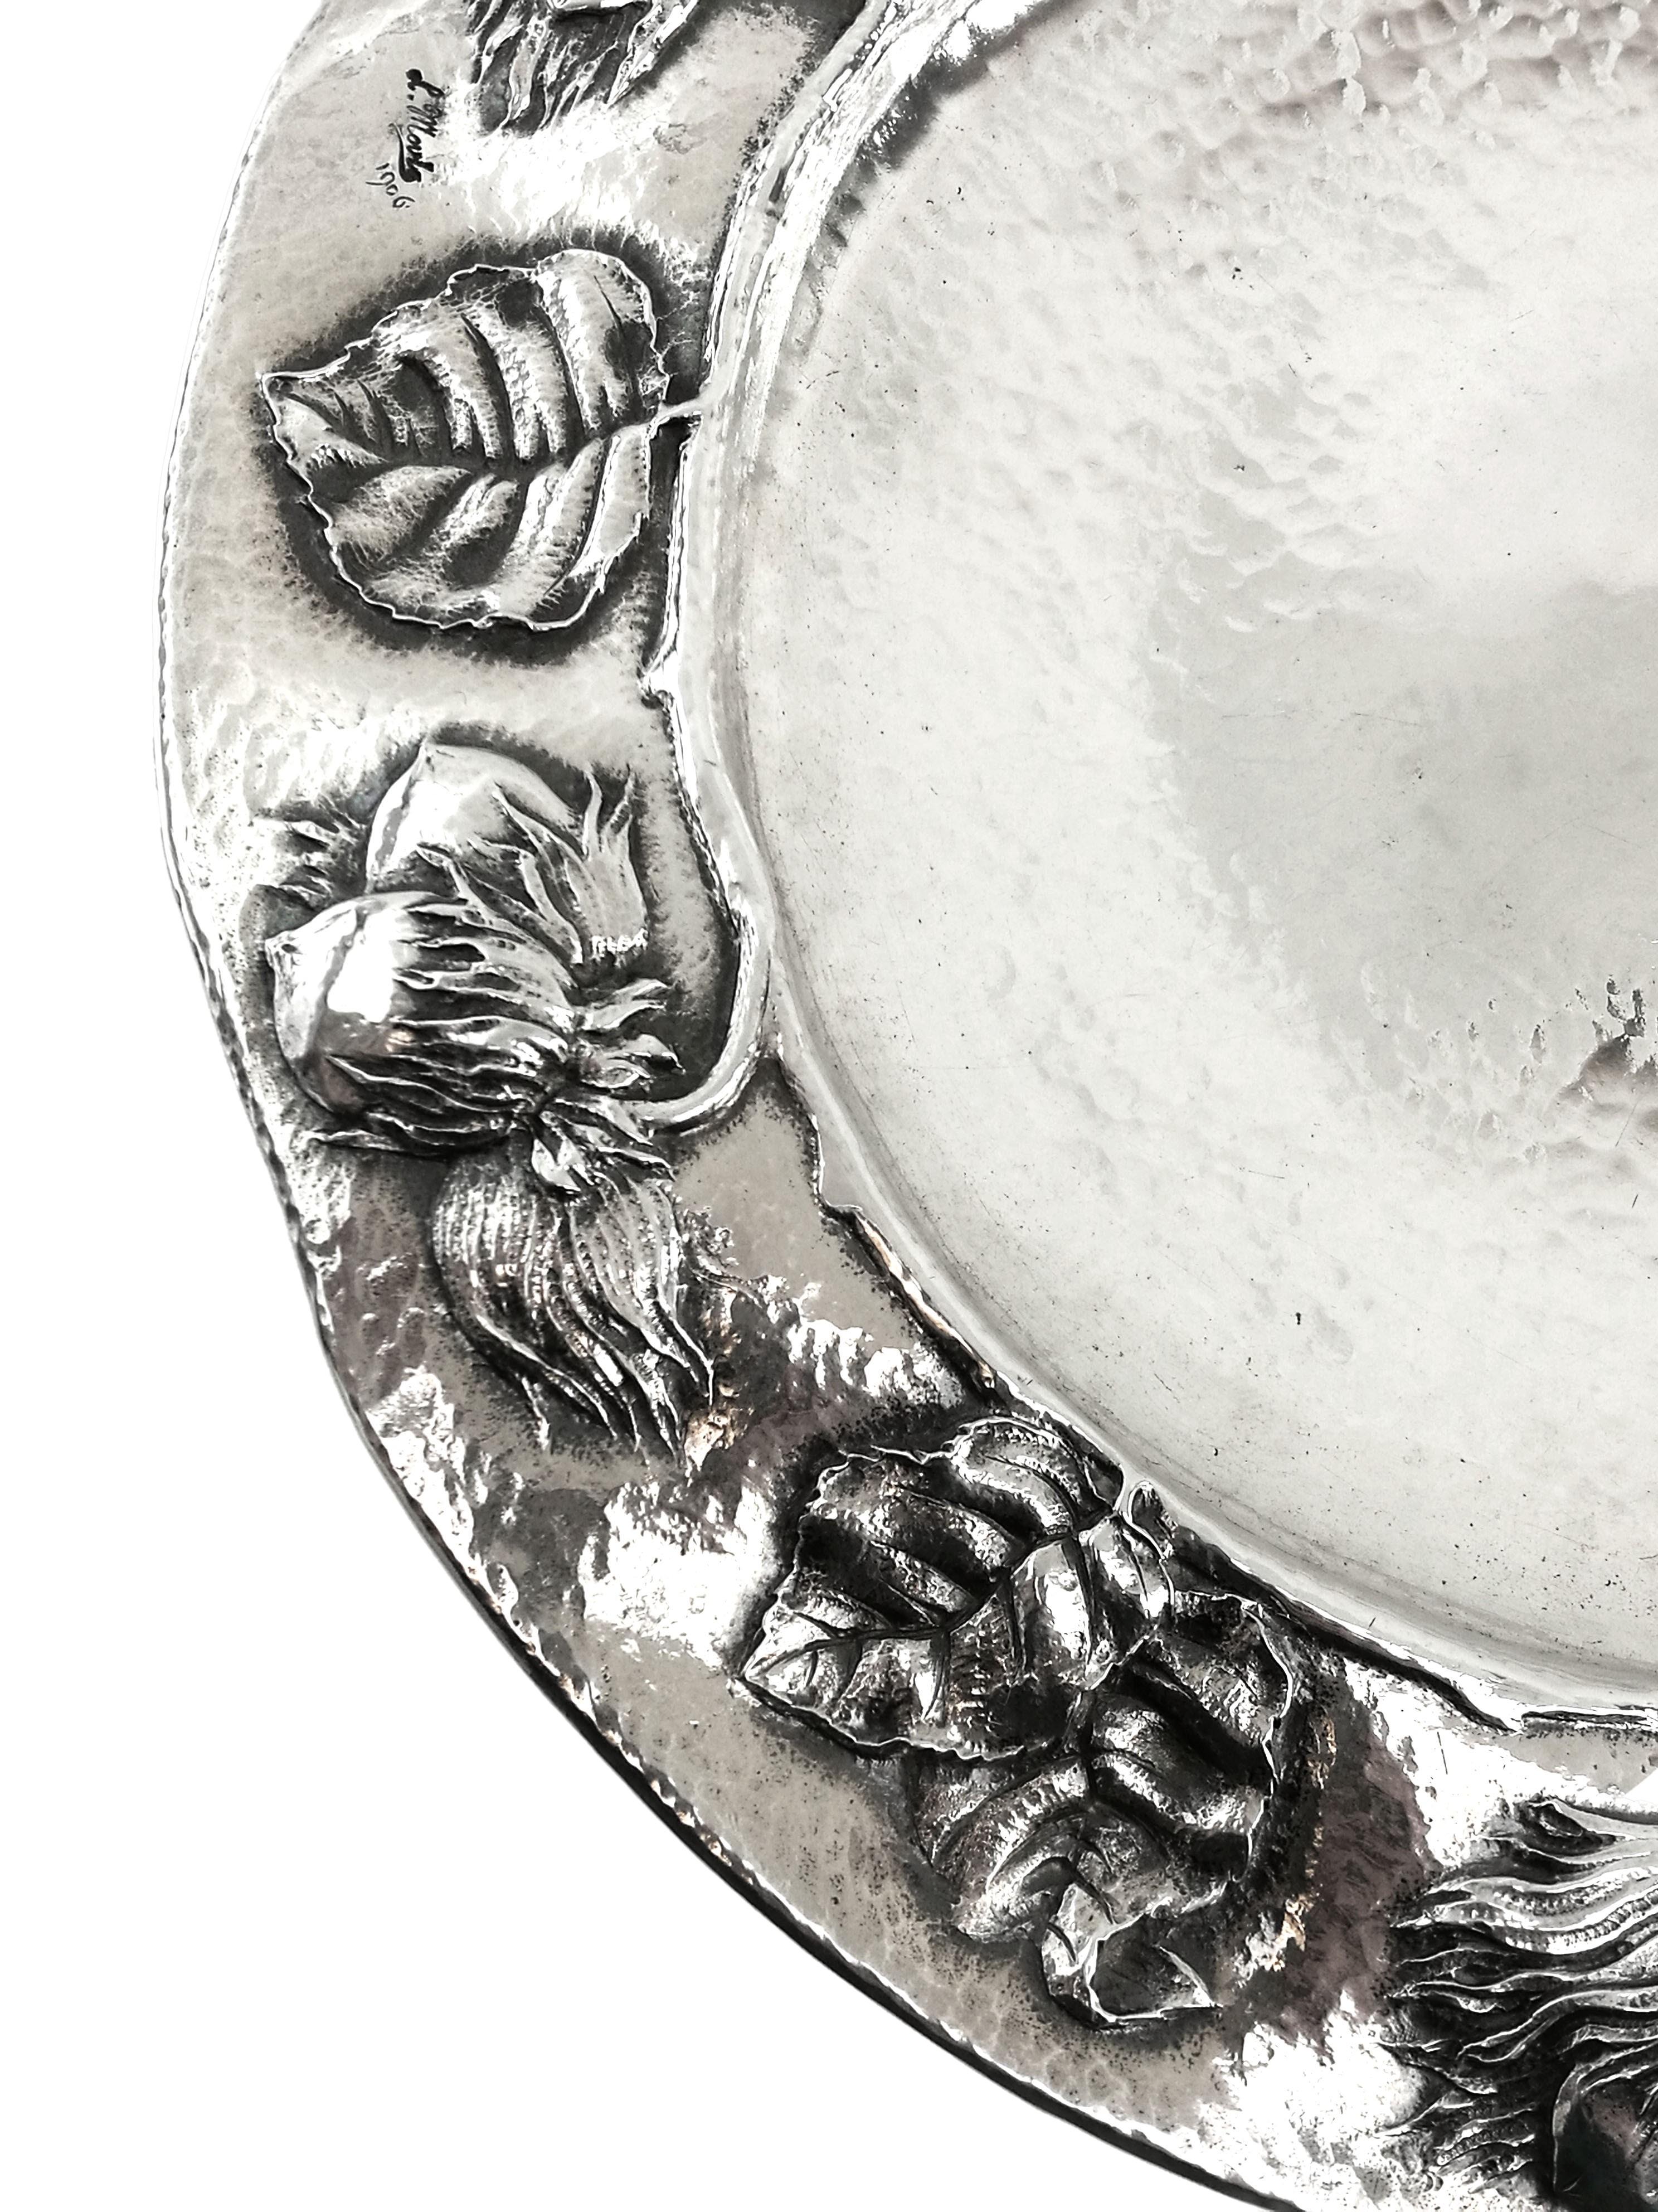 Arts and Crafts Antique Arts & Crafts Sterling Silver Dish / Tazza / Comport, London, 1905